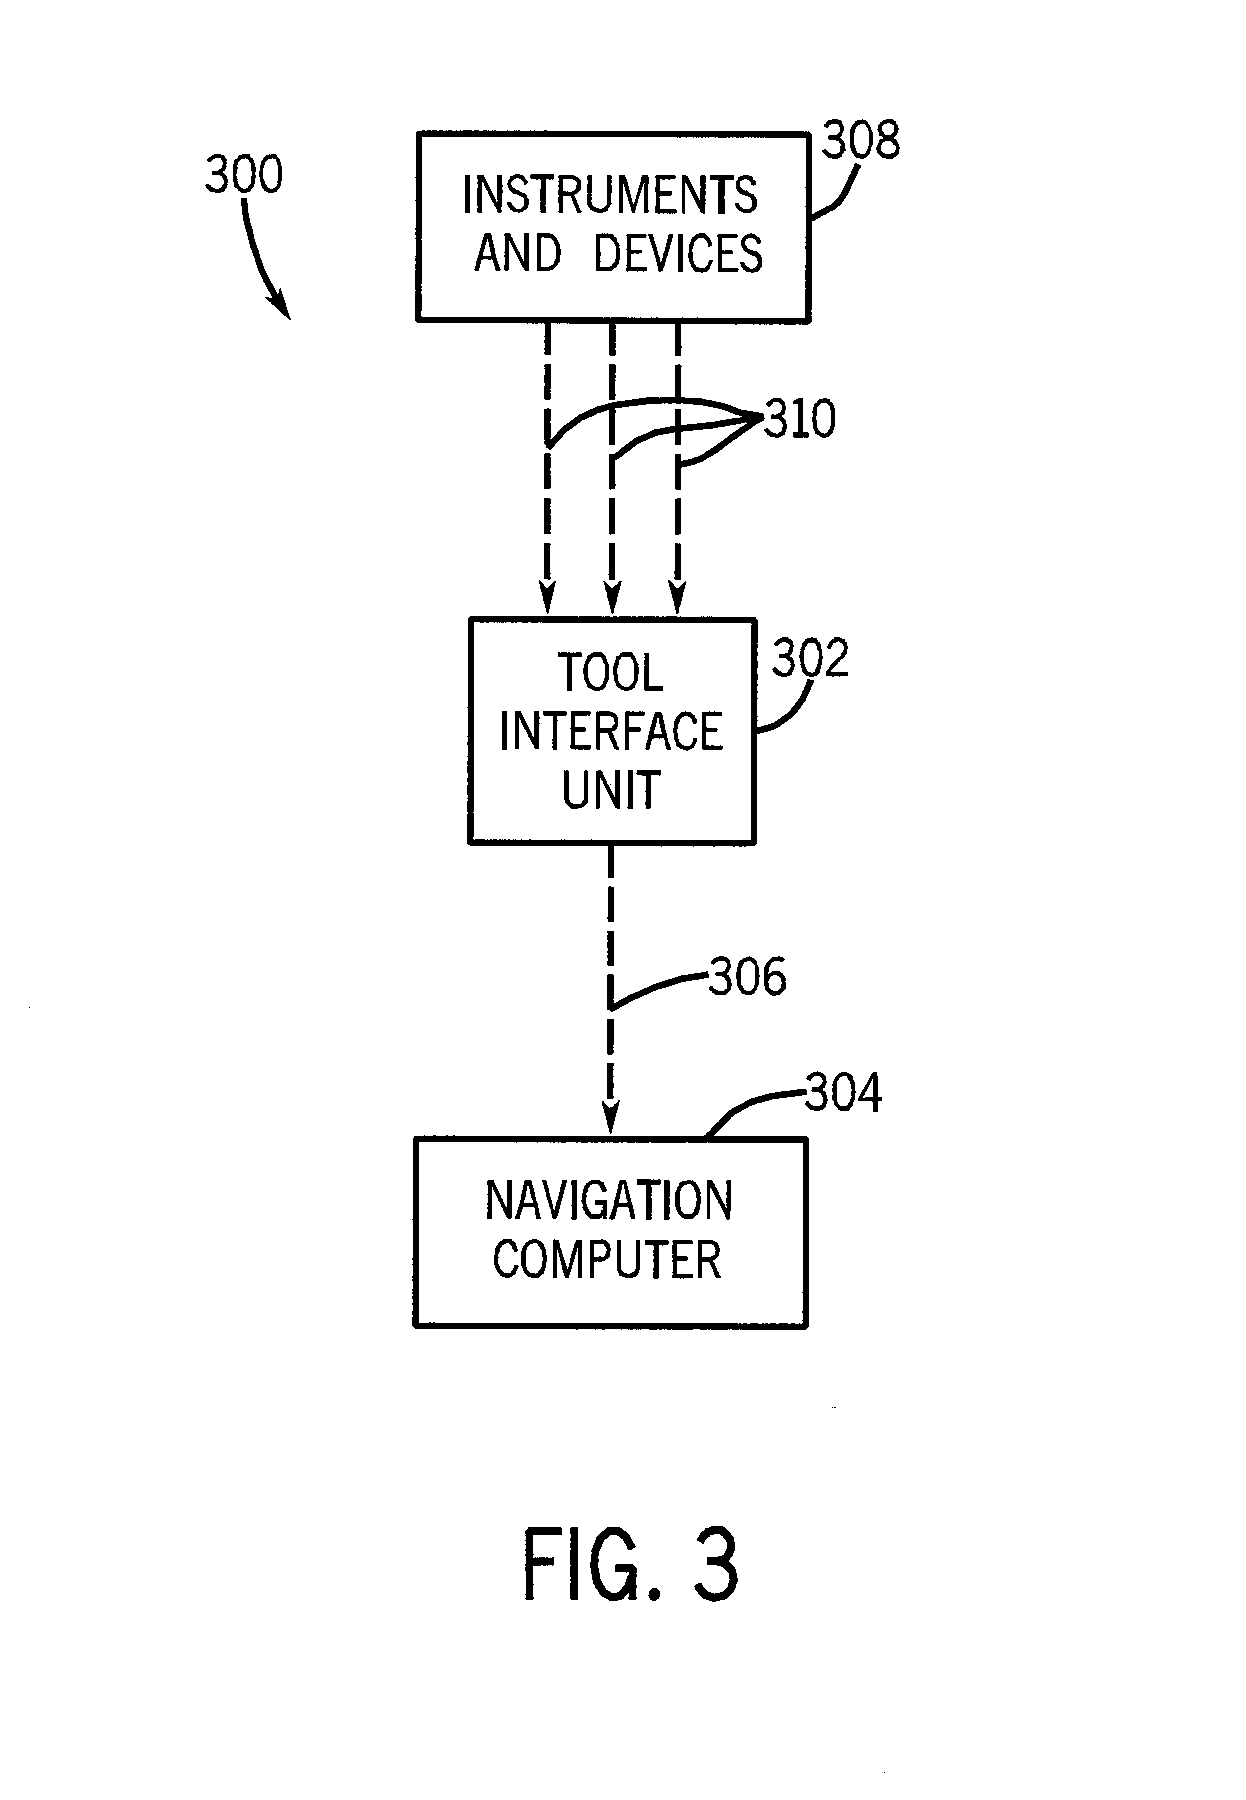 System, method and apparatus for tableside remote connections of medical instruments and systems using wireless communications